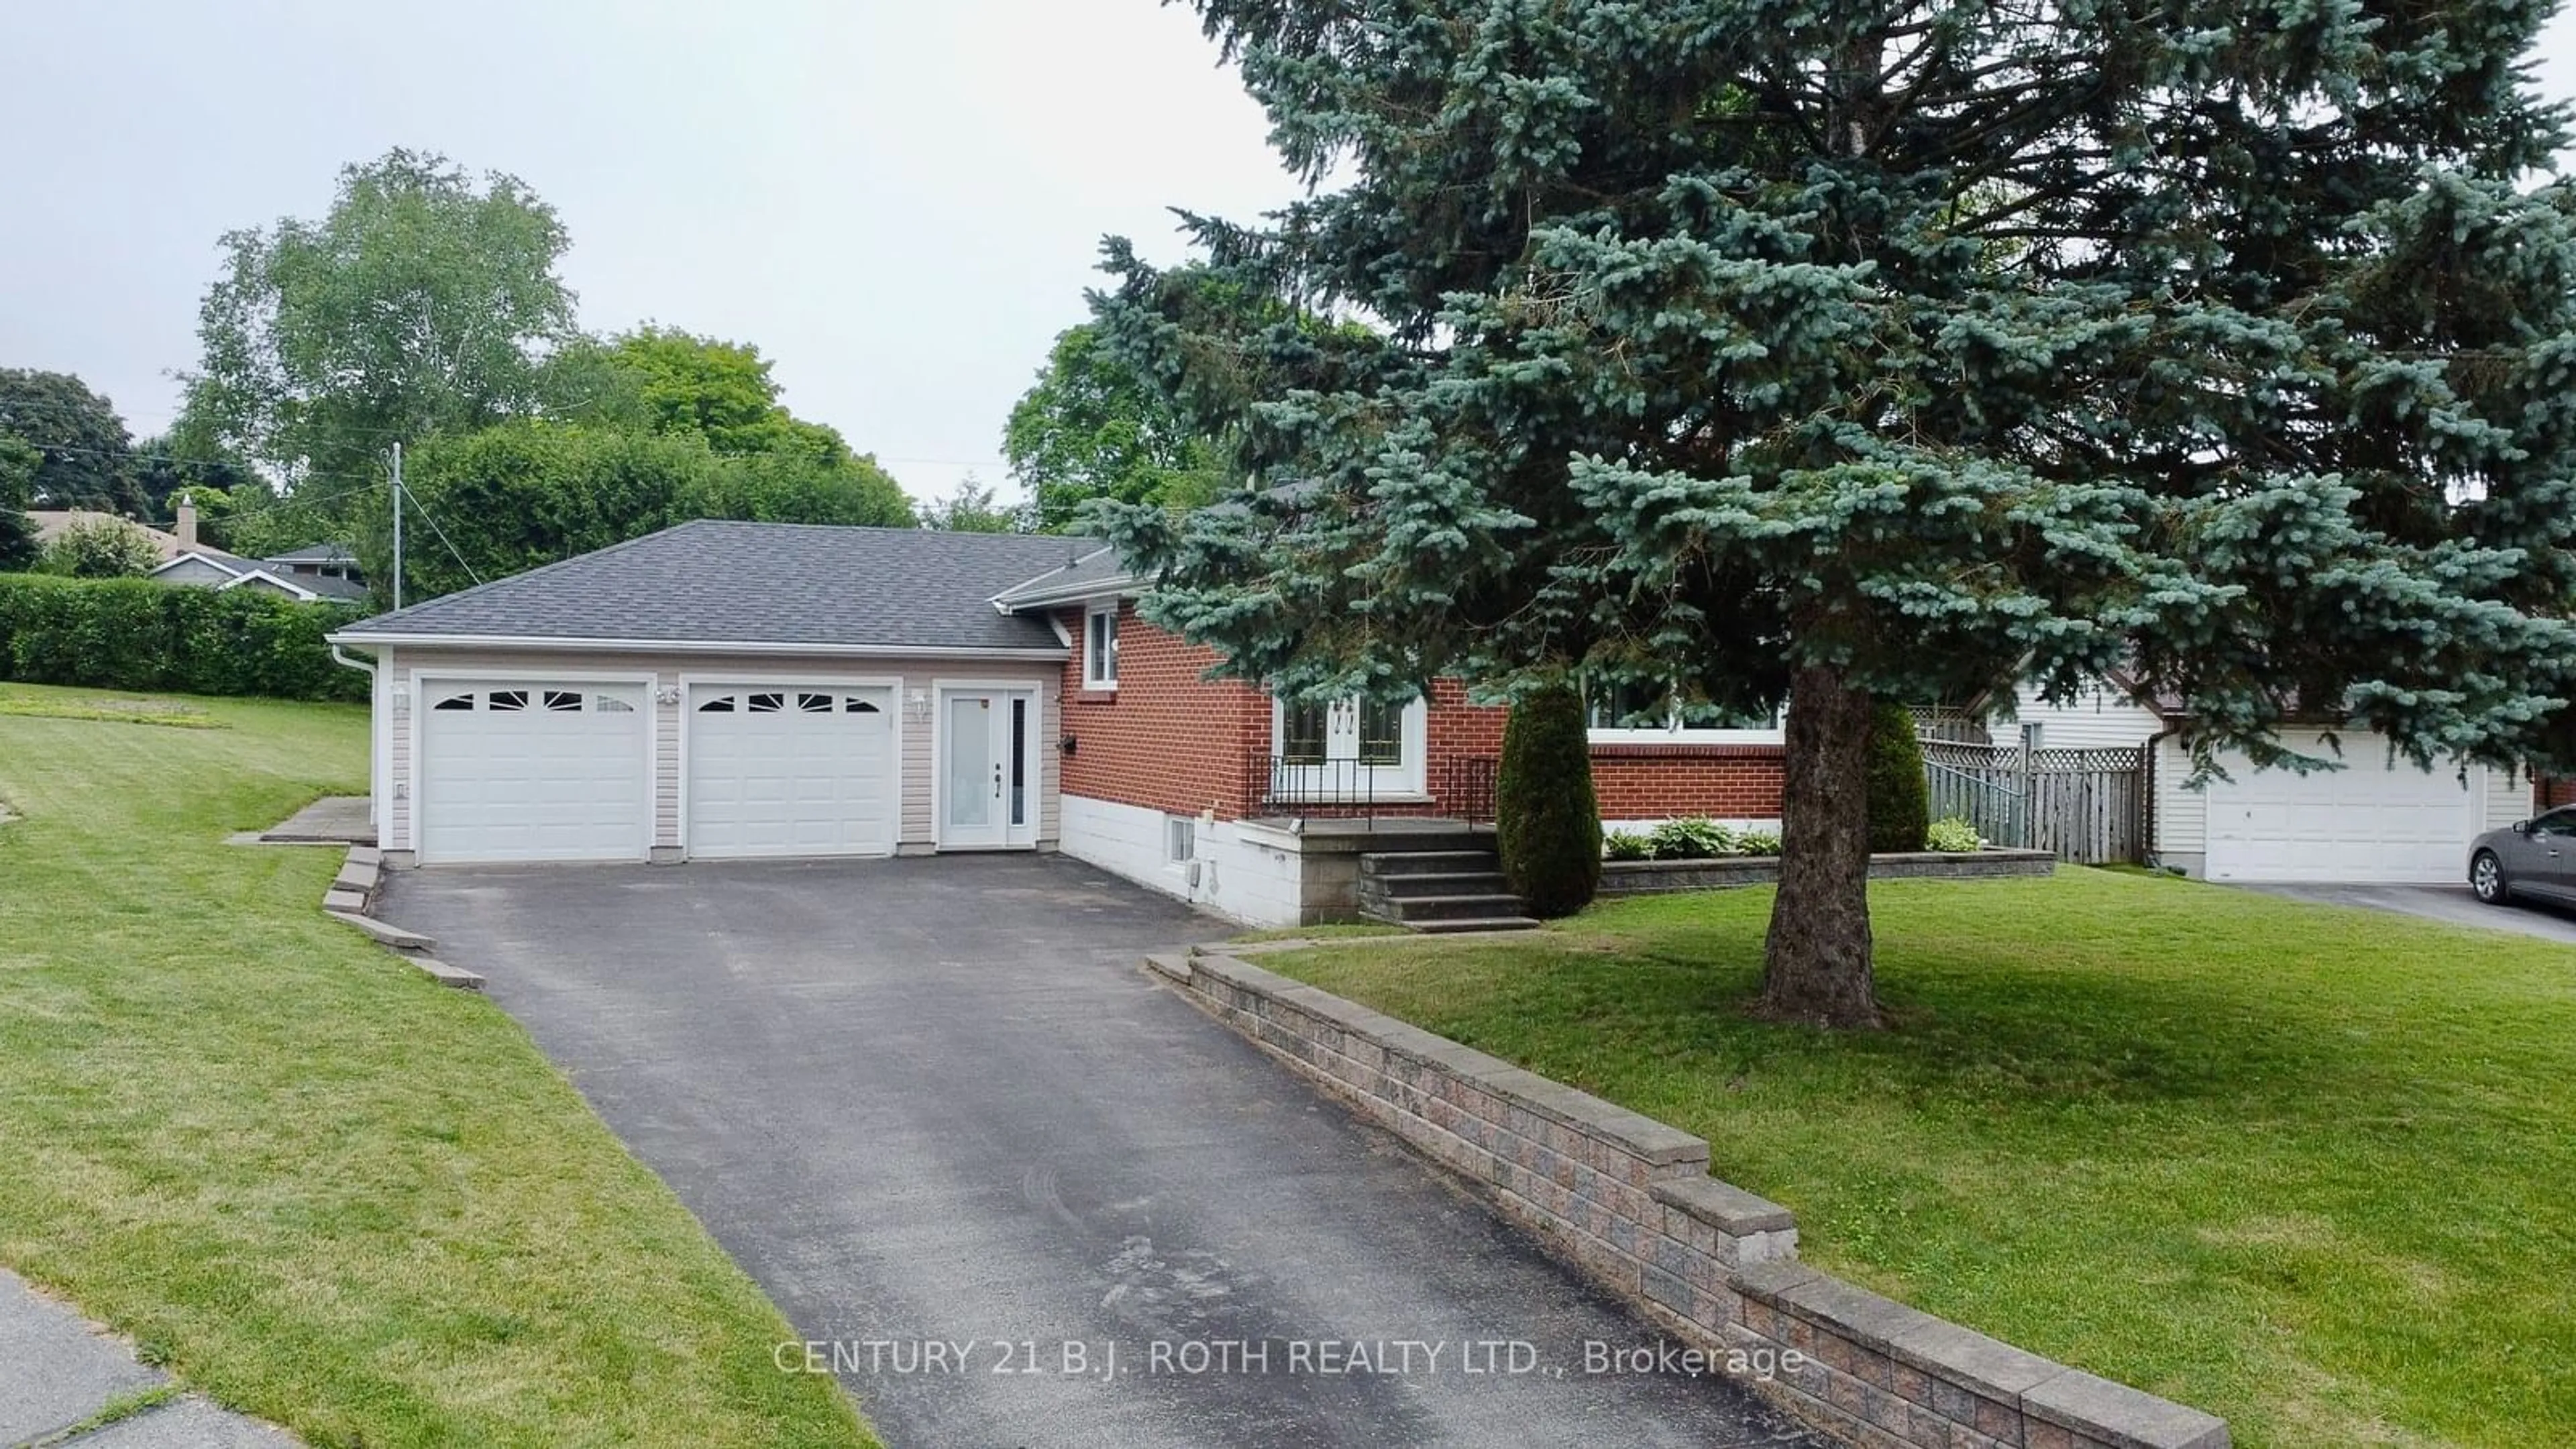 Frontside or backside of a home for 5 Creswick Crt, Barrie Ontario L4M 2J7